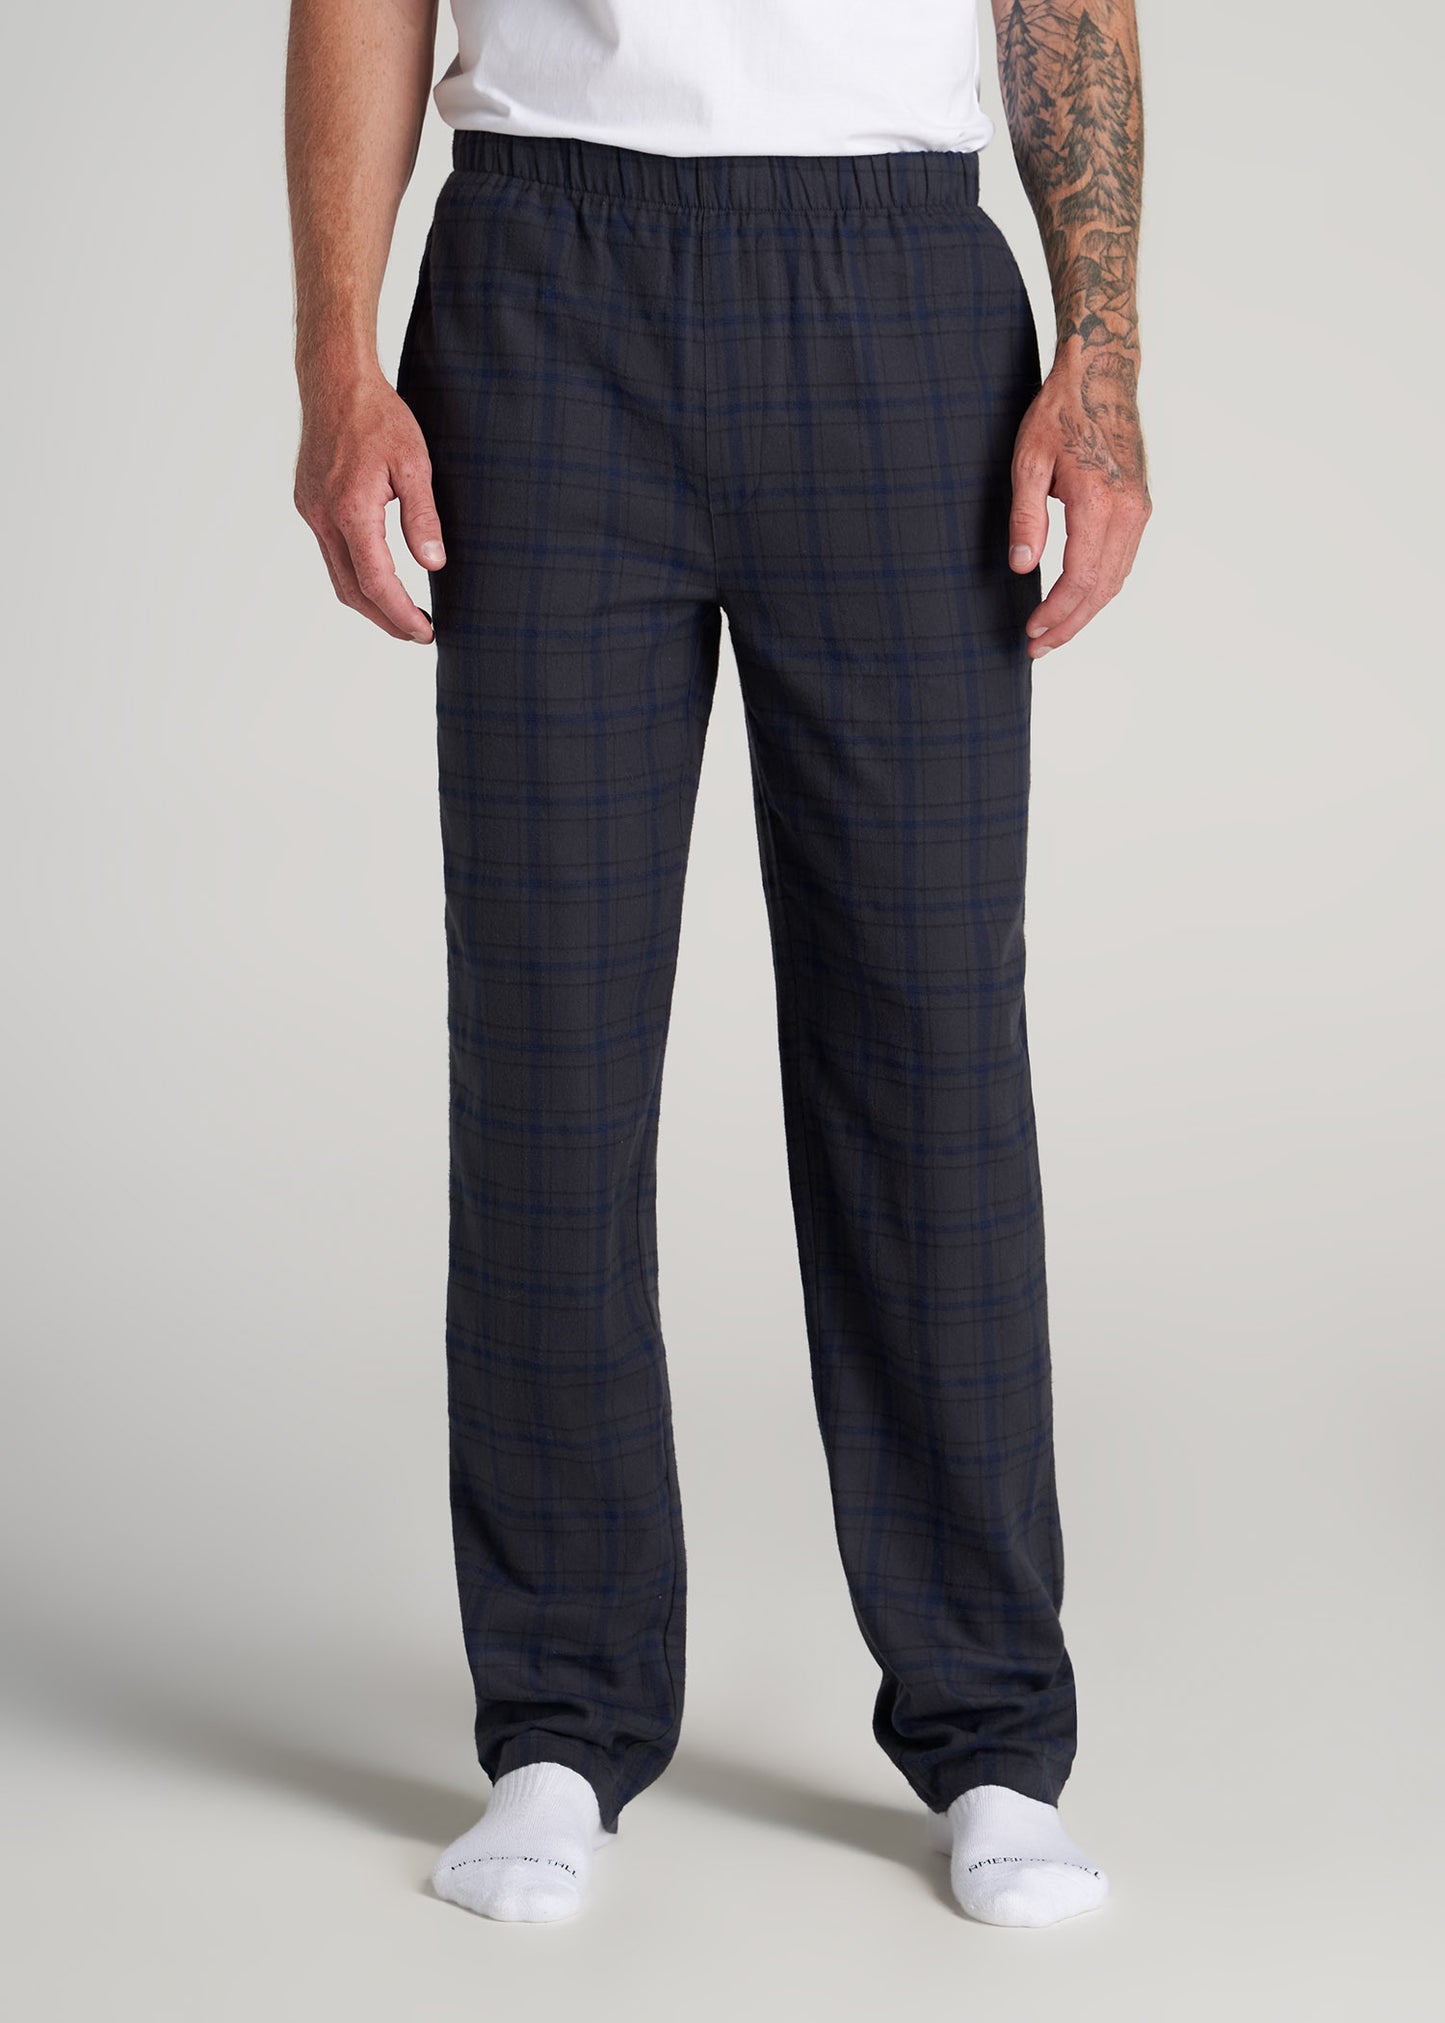 Tall Men's Pajama Bottom: Flannel, 3 Plaid Colors Available - Tall Lengths  –